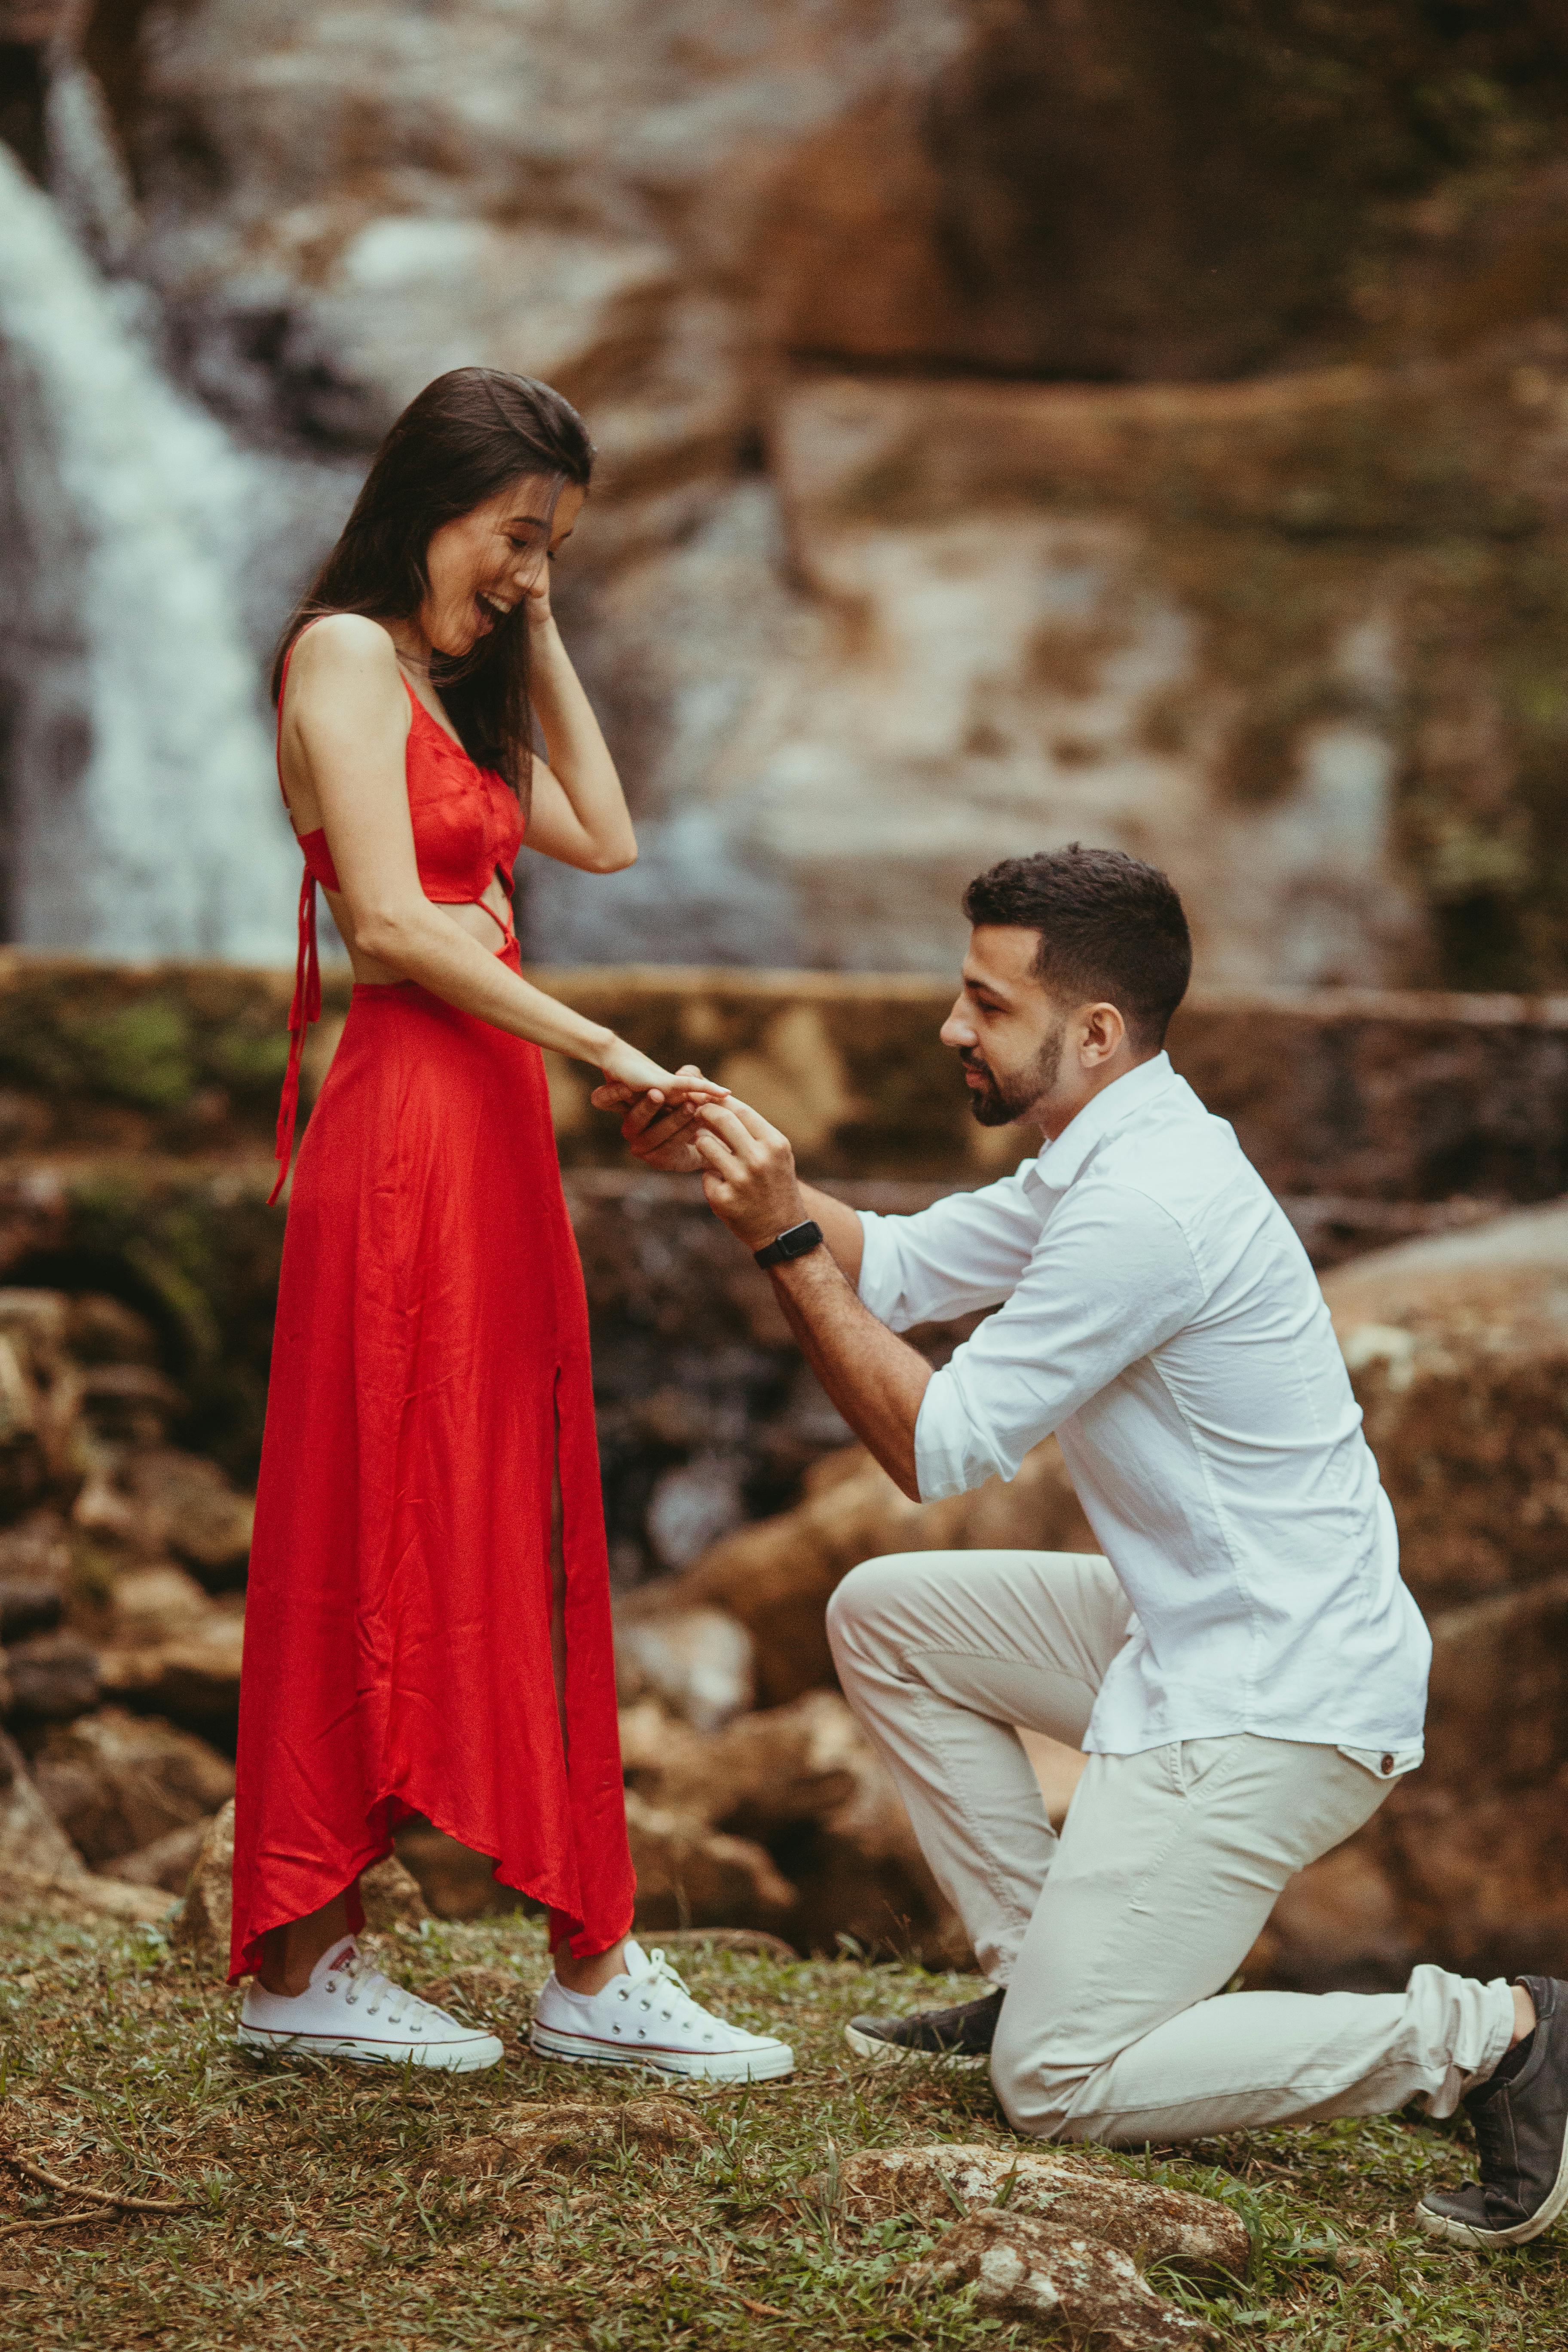 A man proposing to his girlfriend amidst a scenic view | Source: Pexels